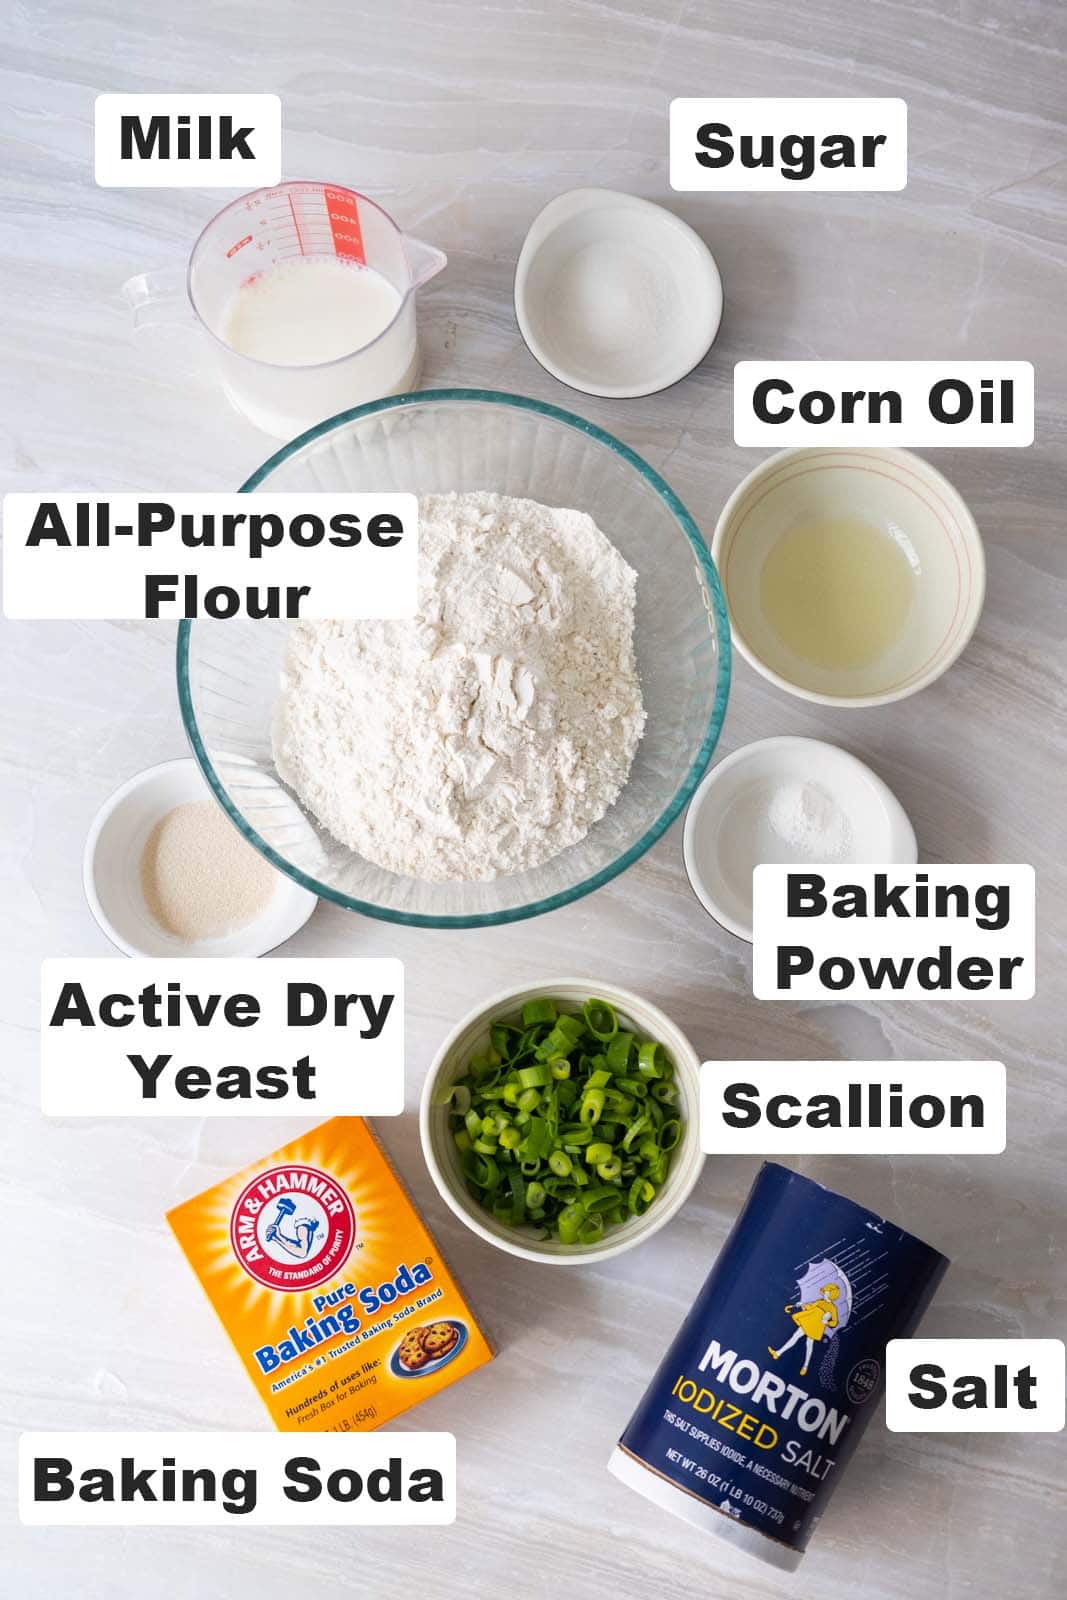 All ingredients placed on table for scallion buns' recipe.